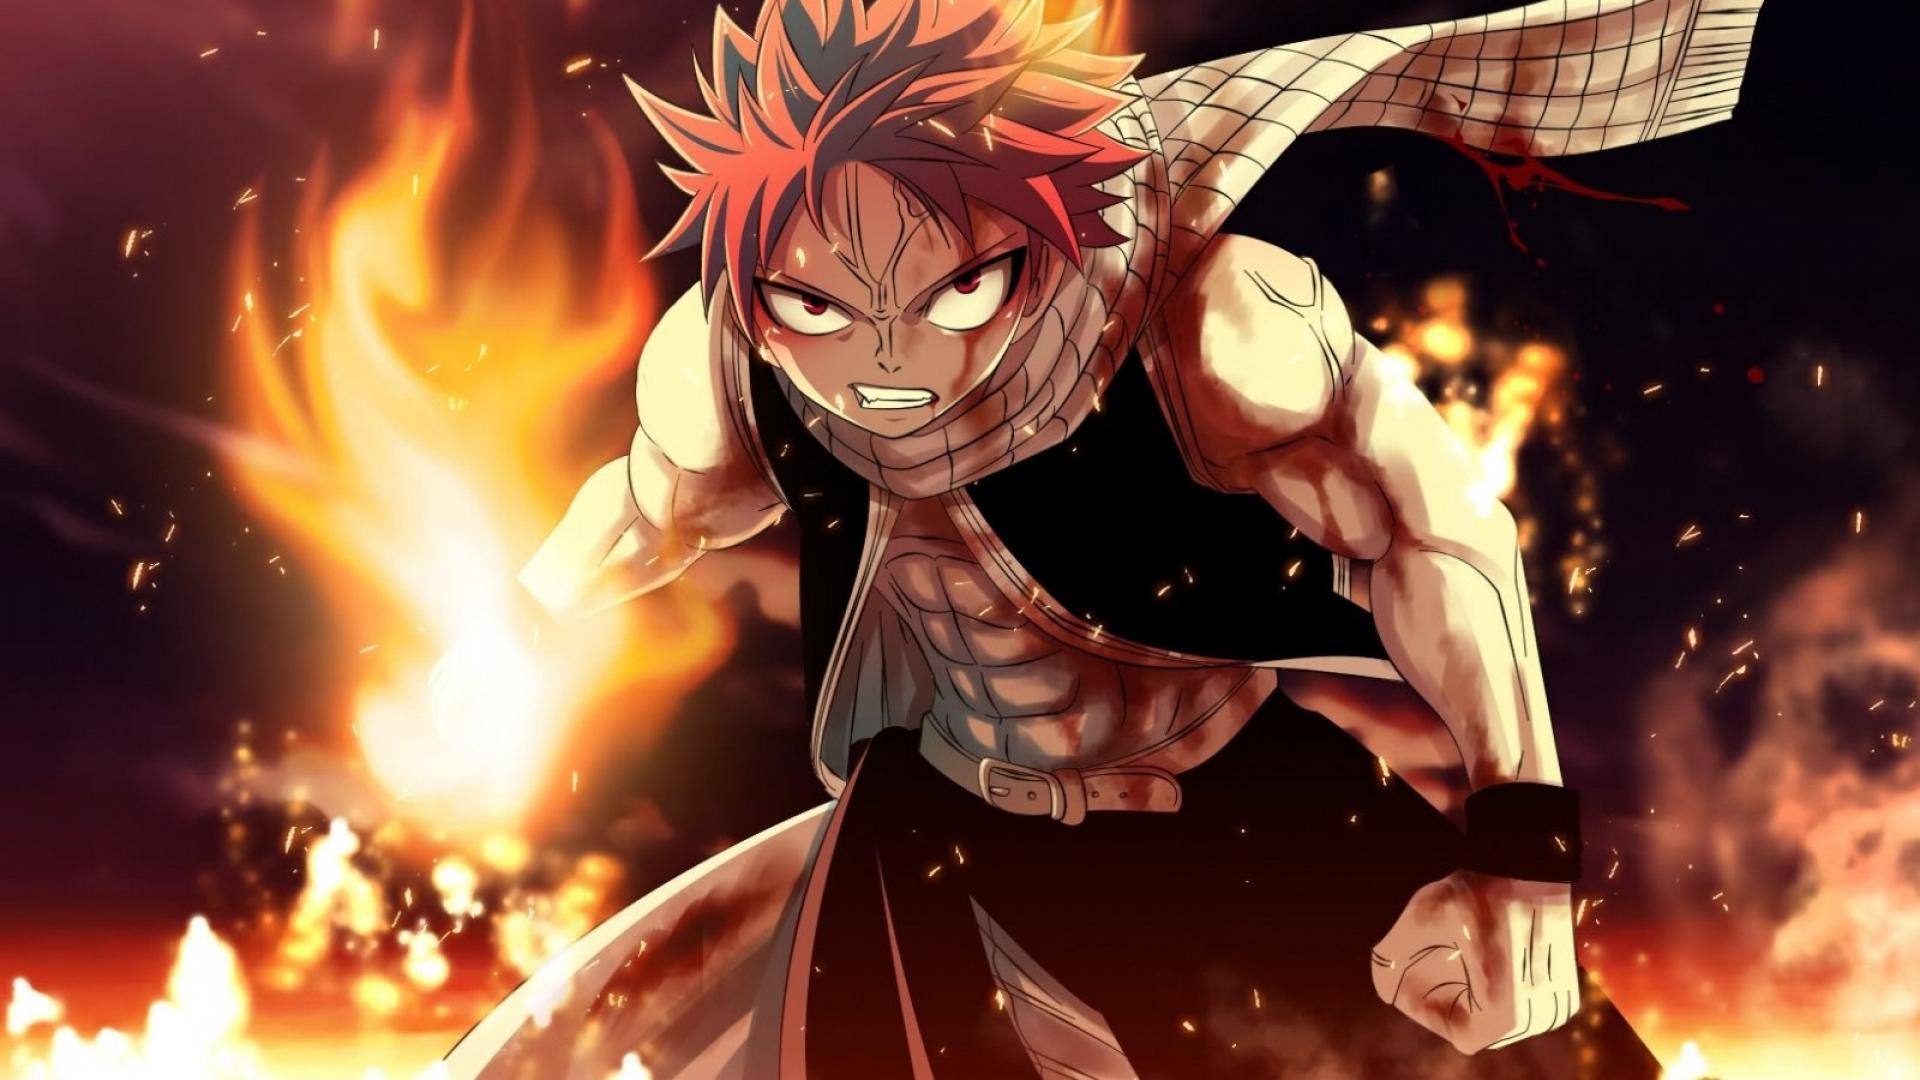 Fairy Tail wallpaper HD free wallpaper background image